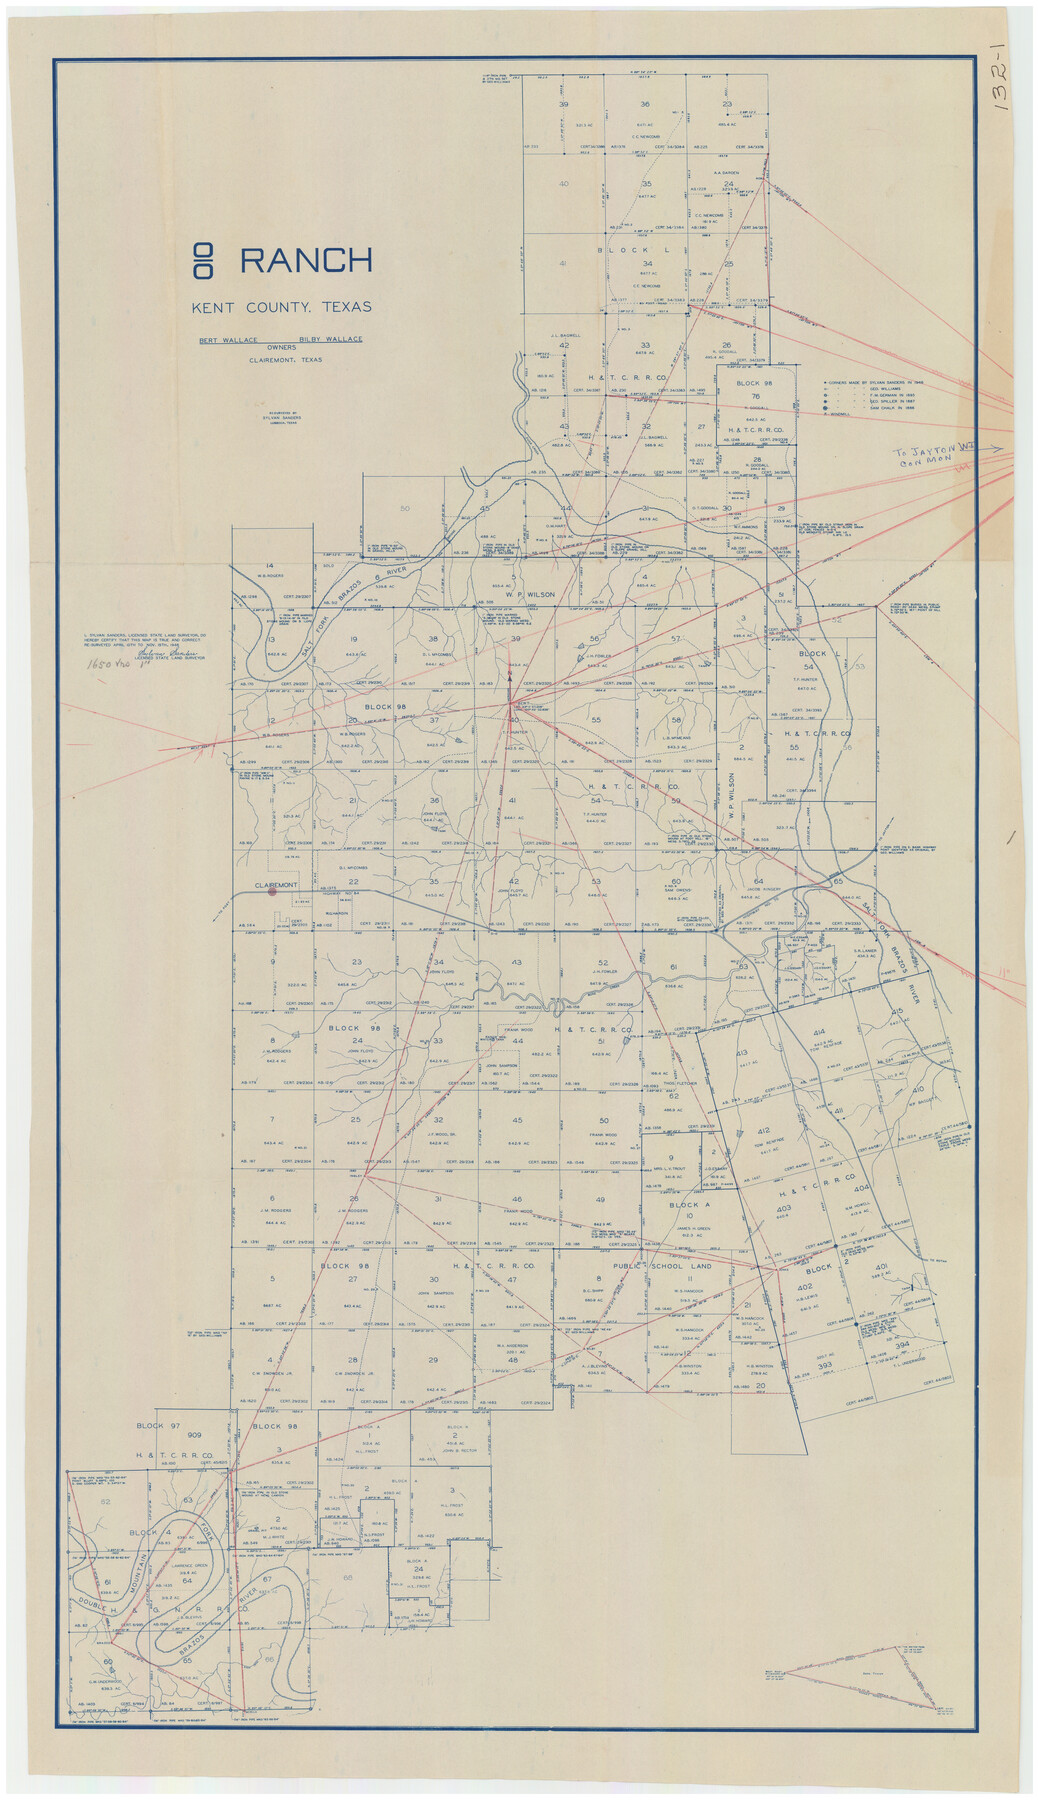 91032, [8 Ranch, Kent County, Texas], Twichell Survey Records